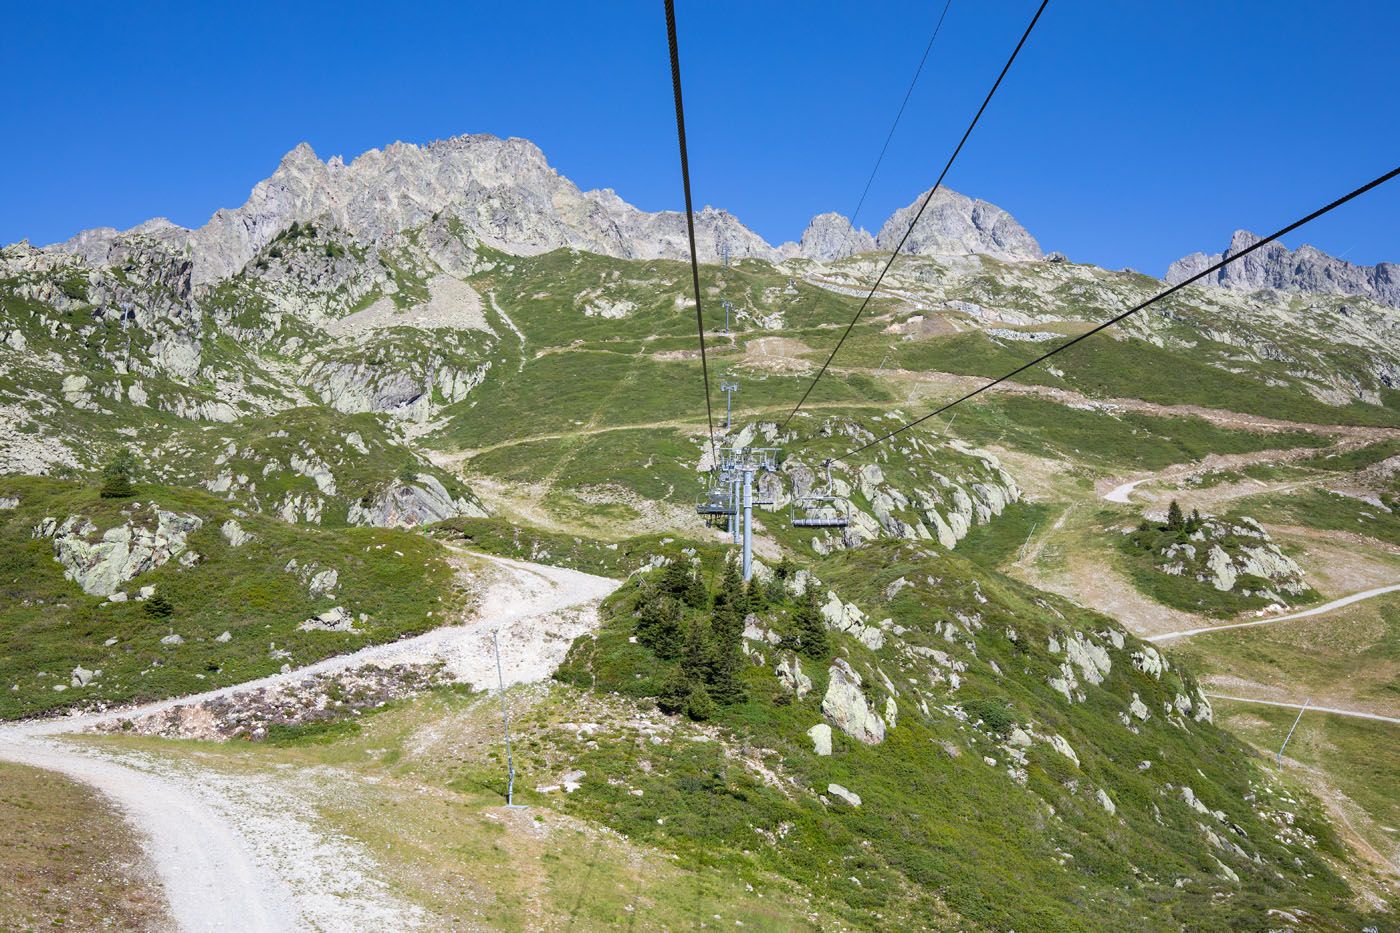 View from LIndex Chairlift